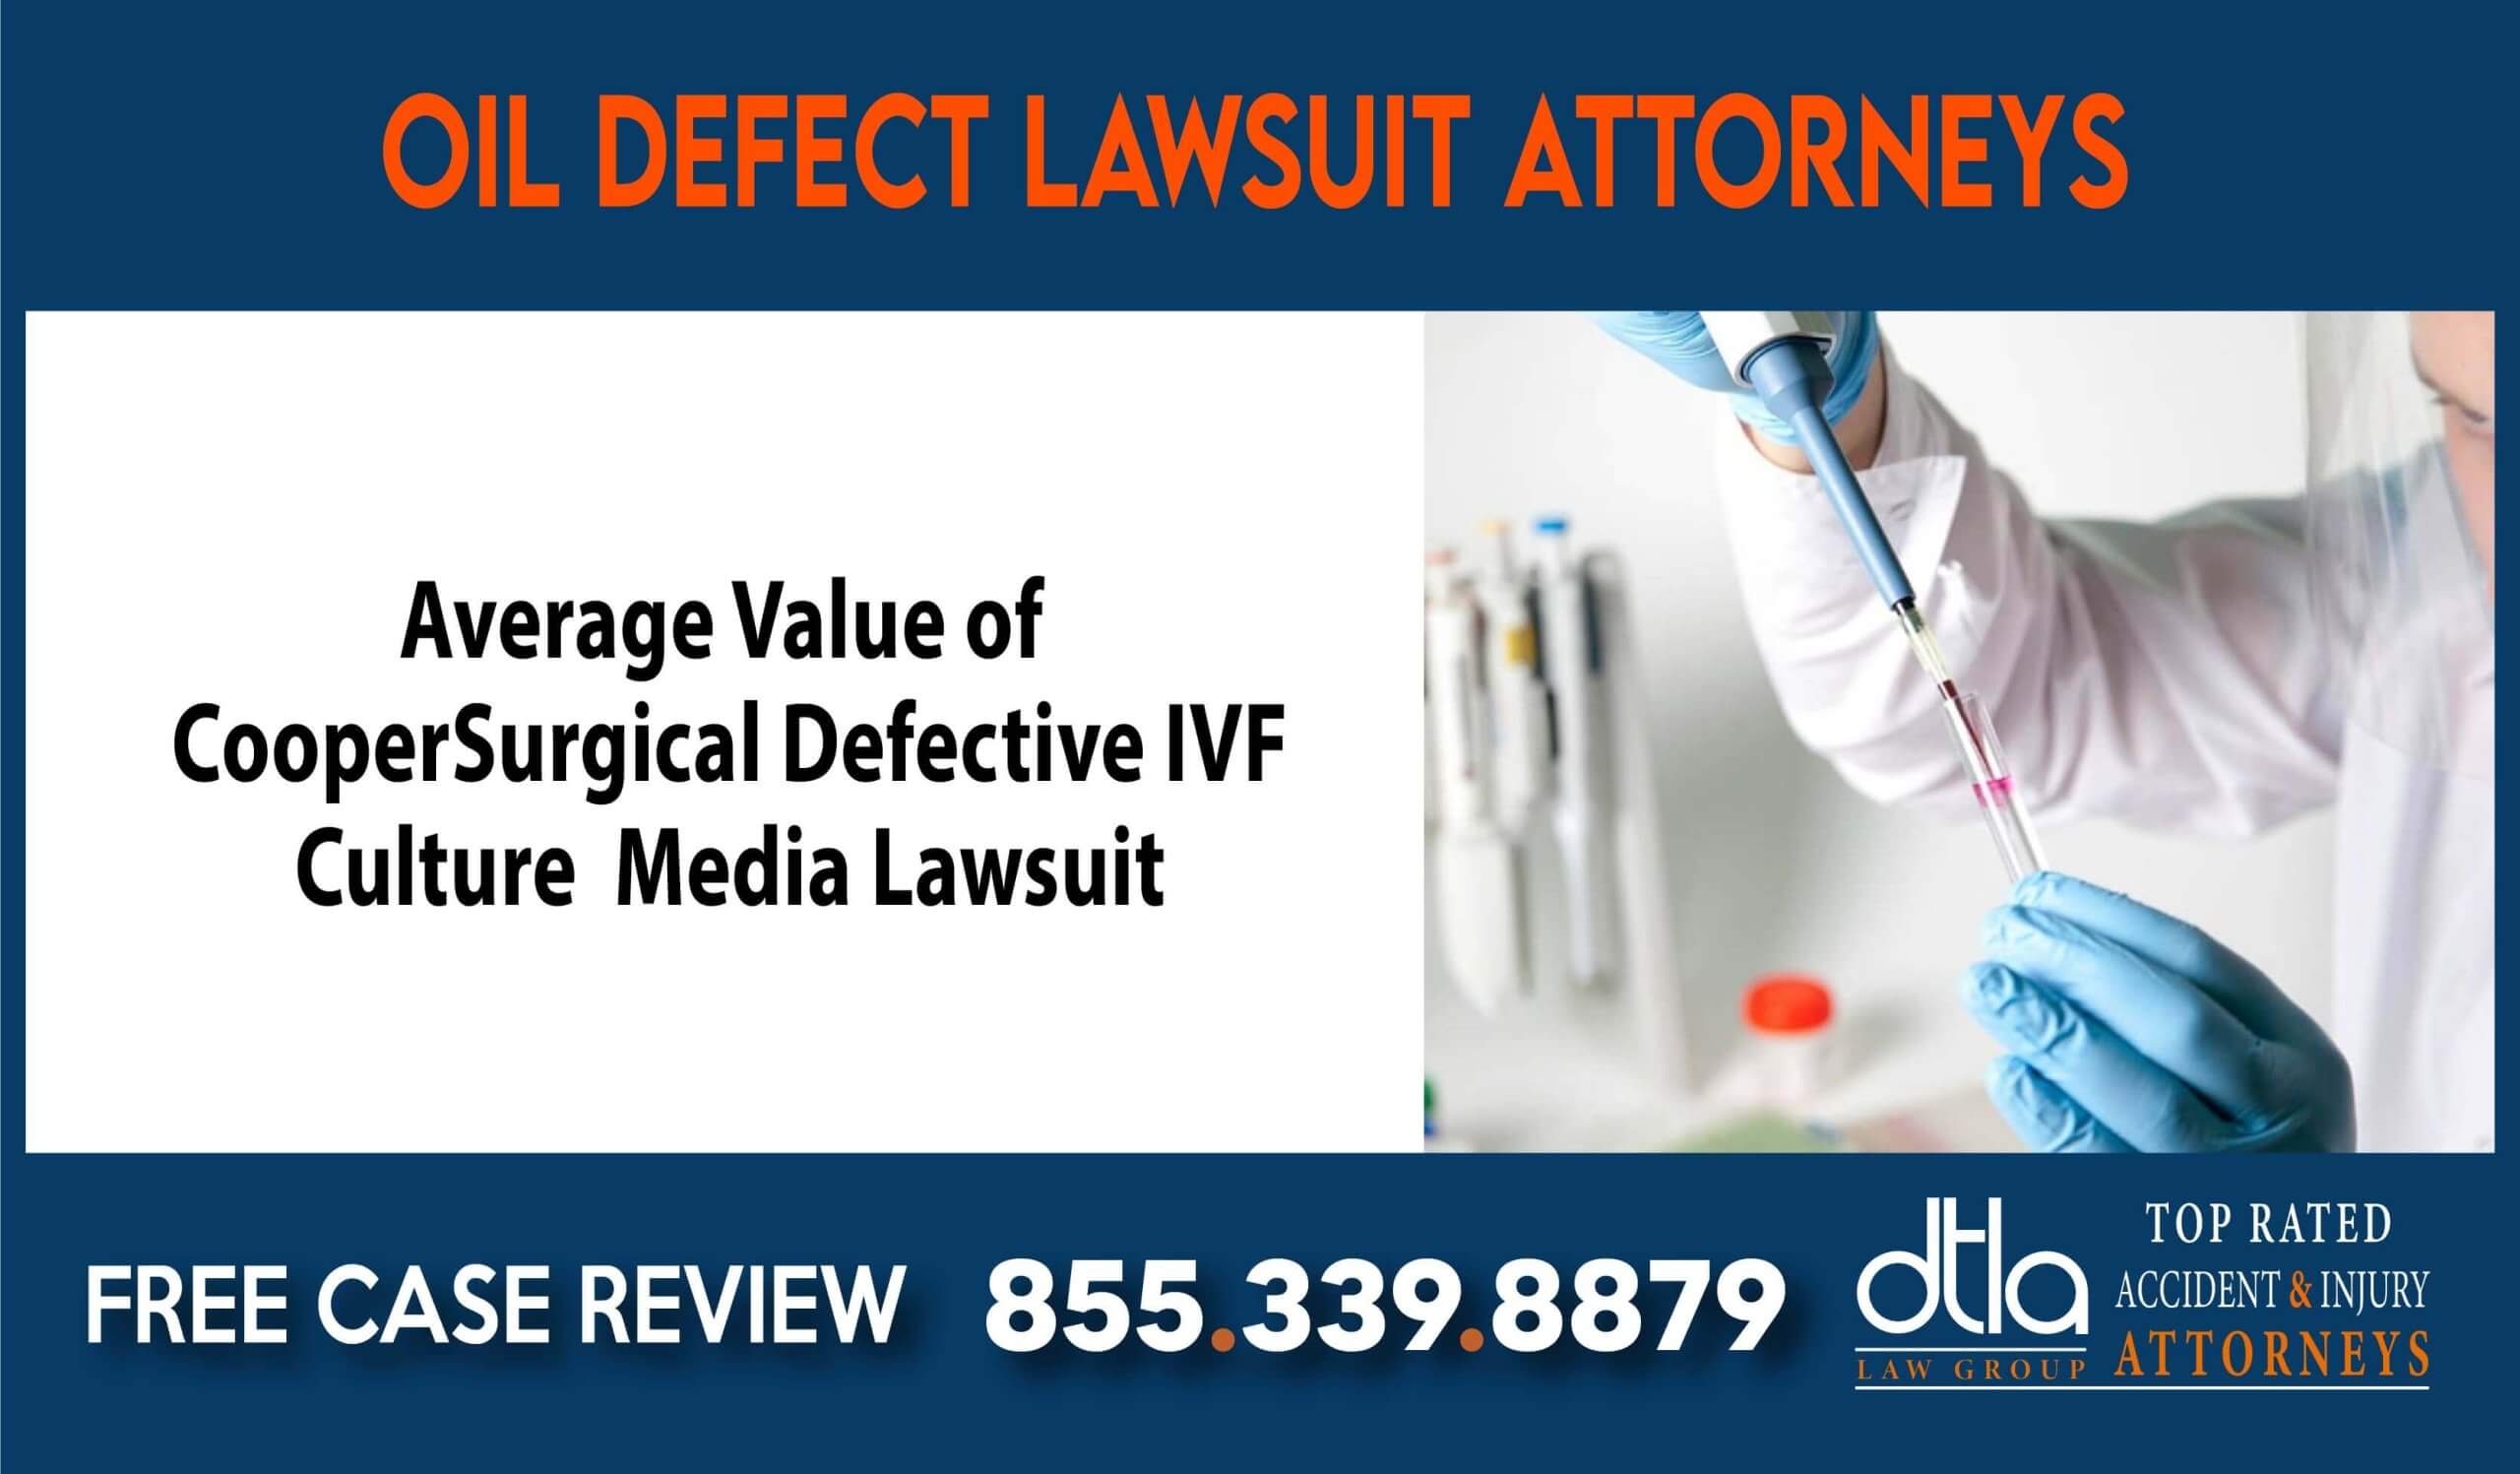 Average Value of CooperSurgical Defective IVF Culture Media Lawsuit lawyer sue compensation incident liability